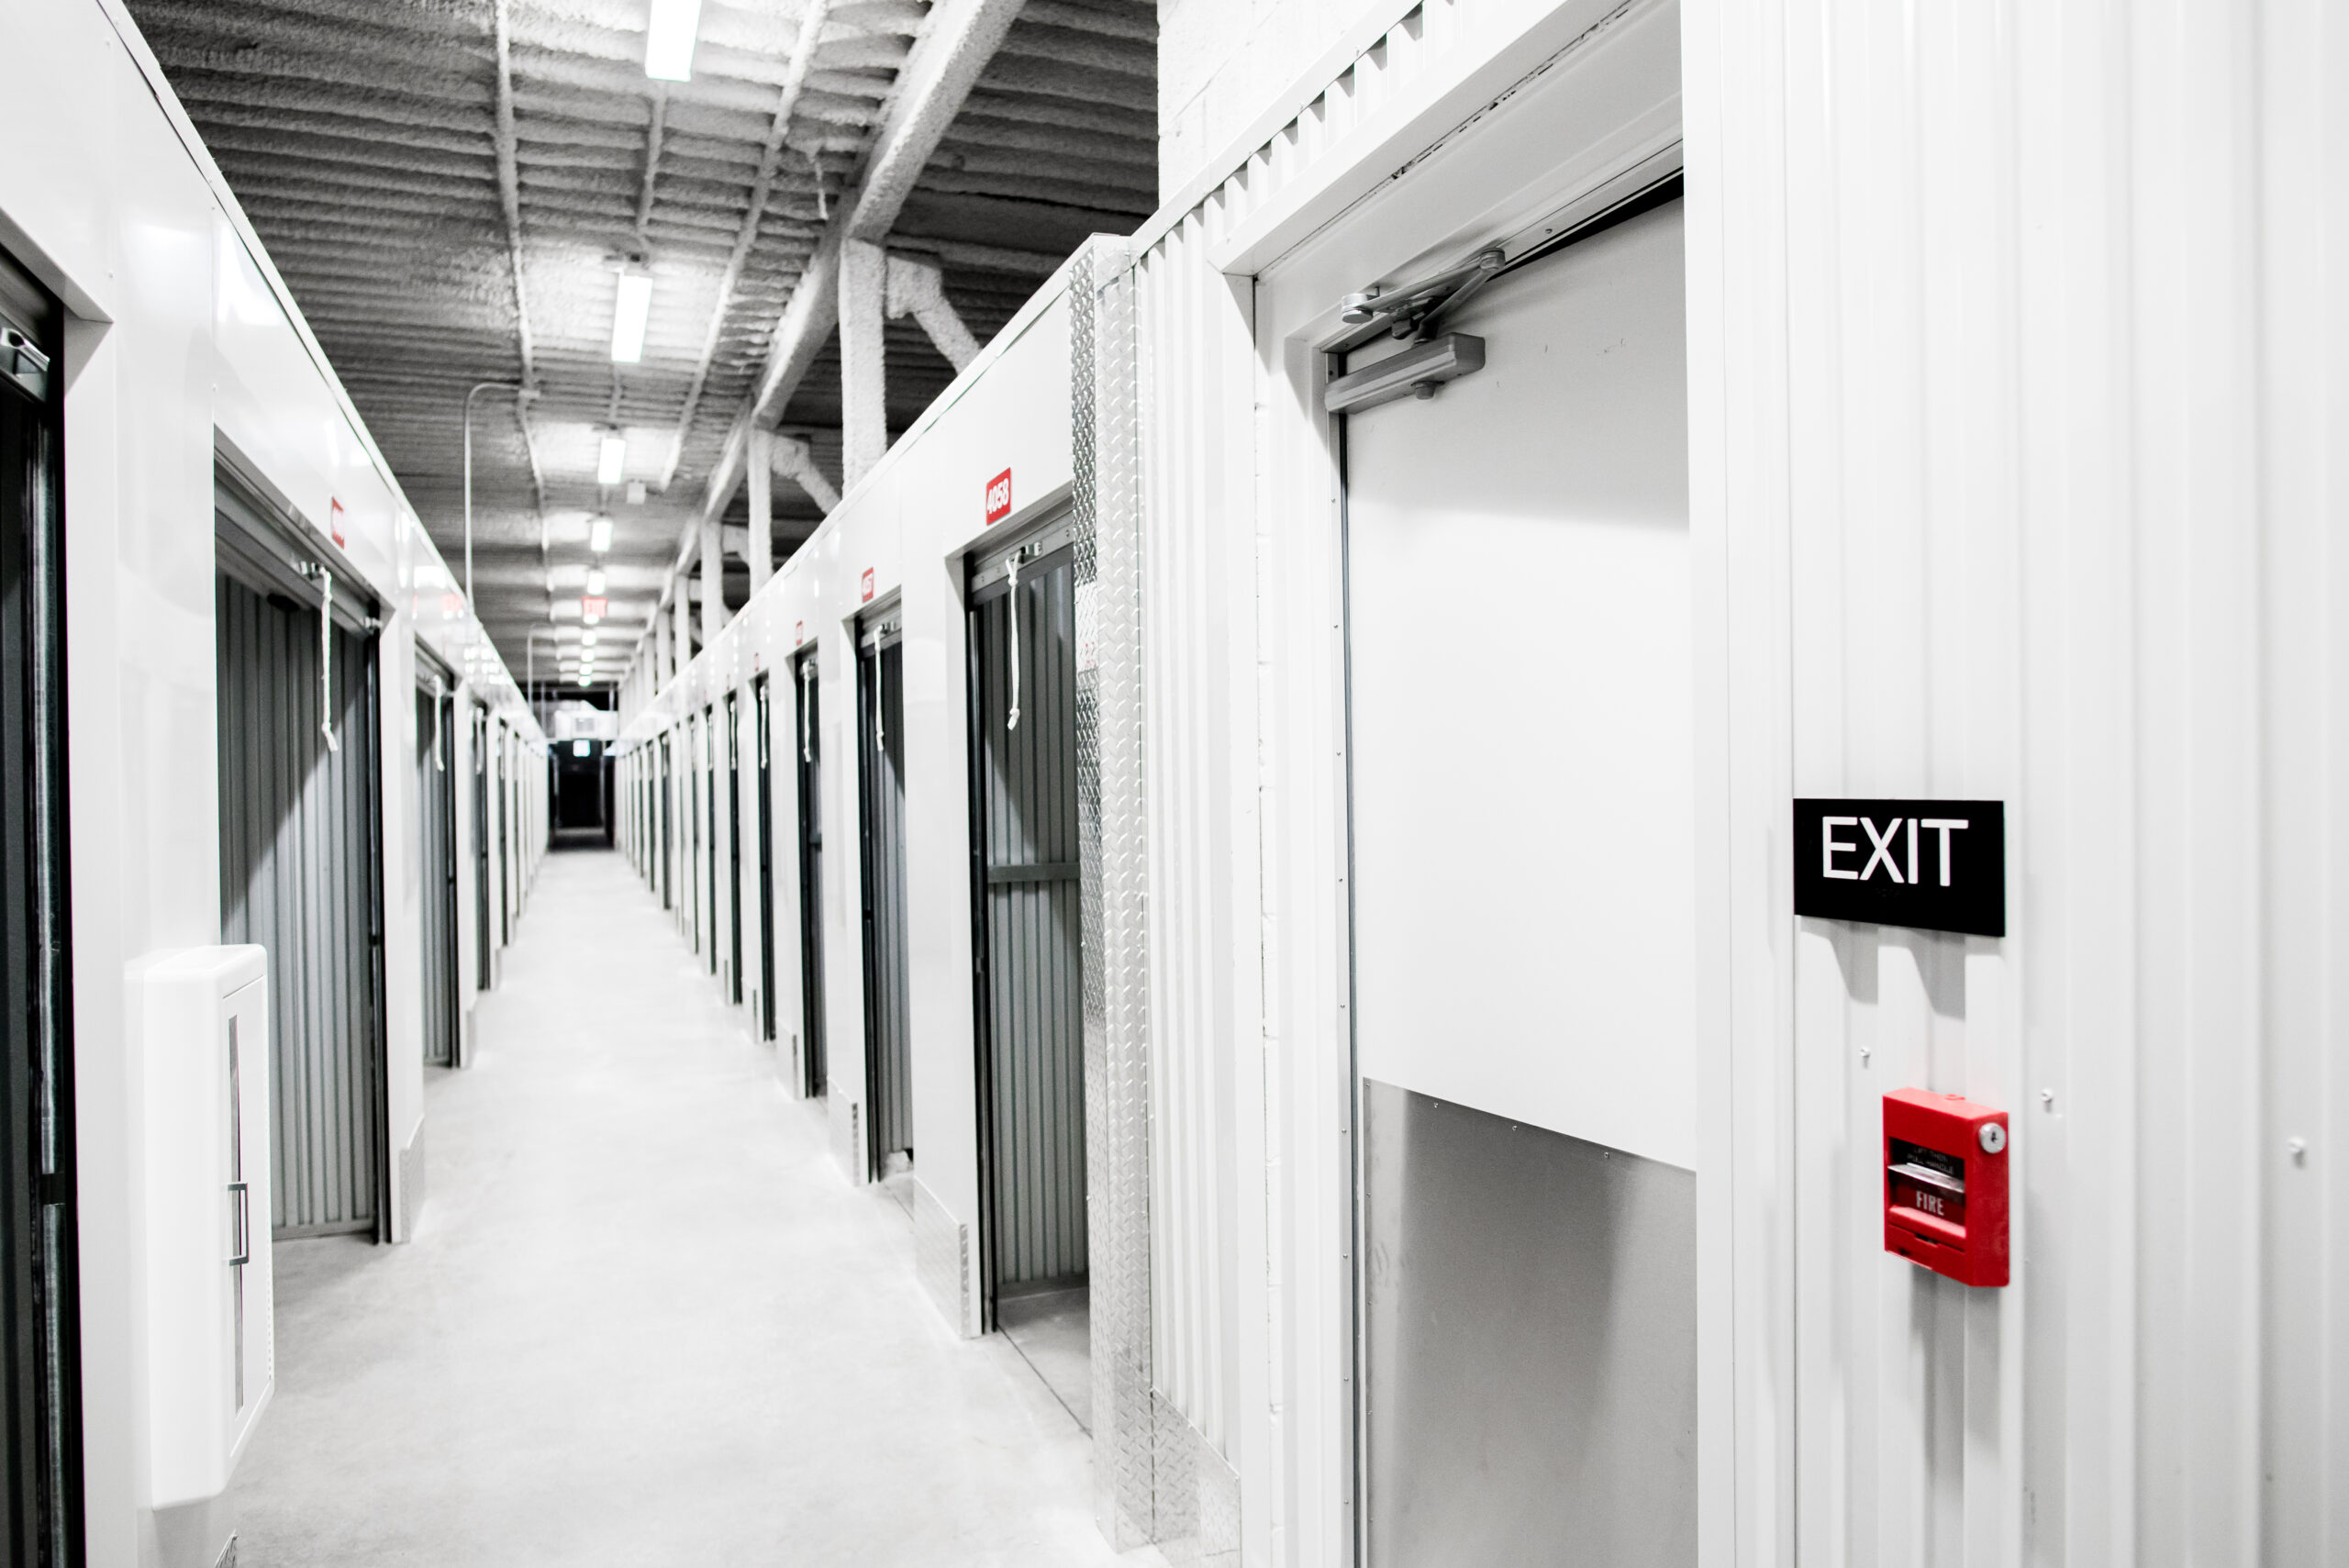 Inside CubeSmart Self-Storage in Pittsburgh where the newest location was construted by Franjo Construction.